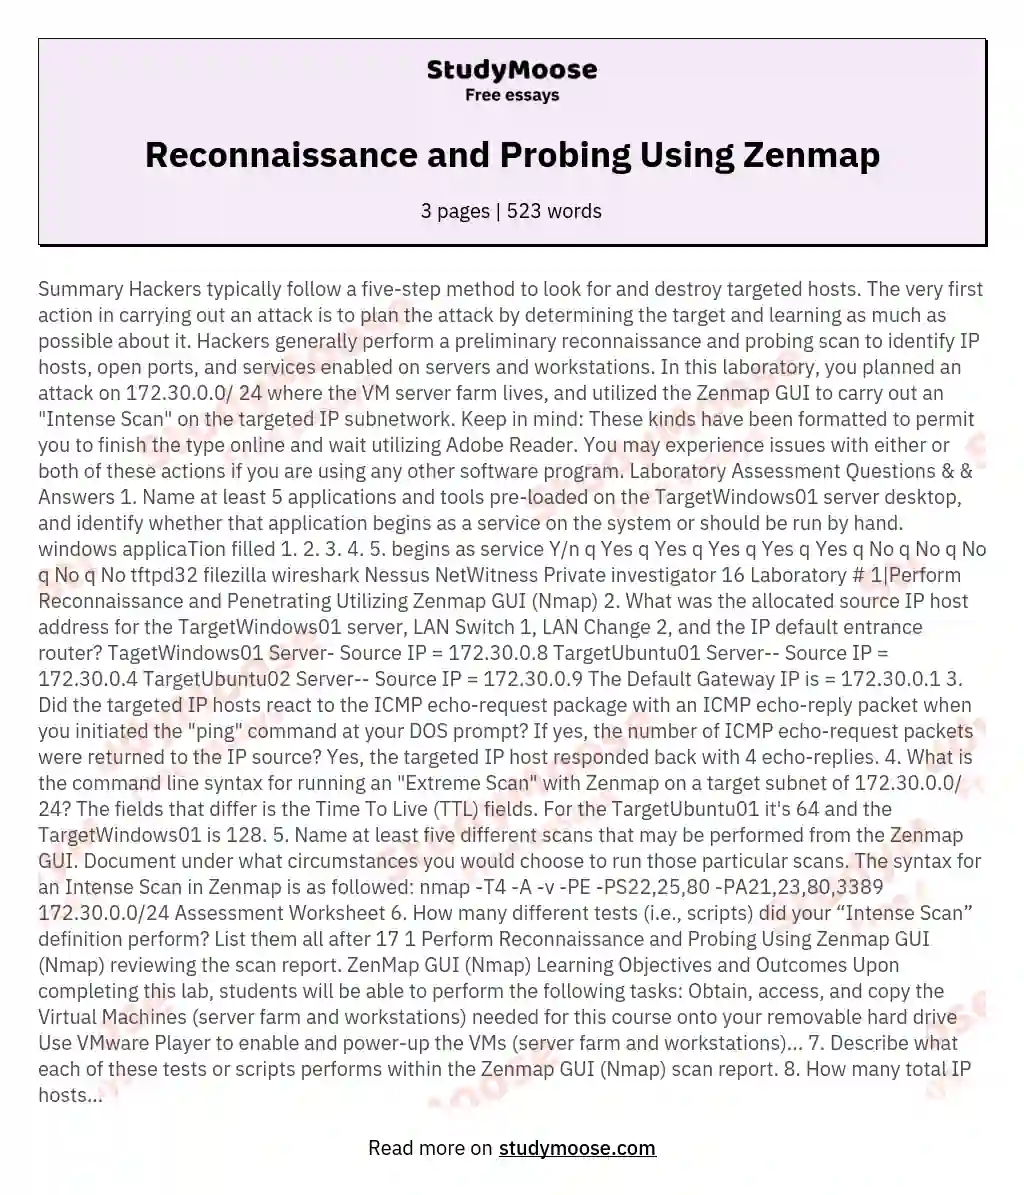 Reconnaissance and Probing Using Zenmap essay